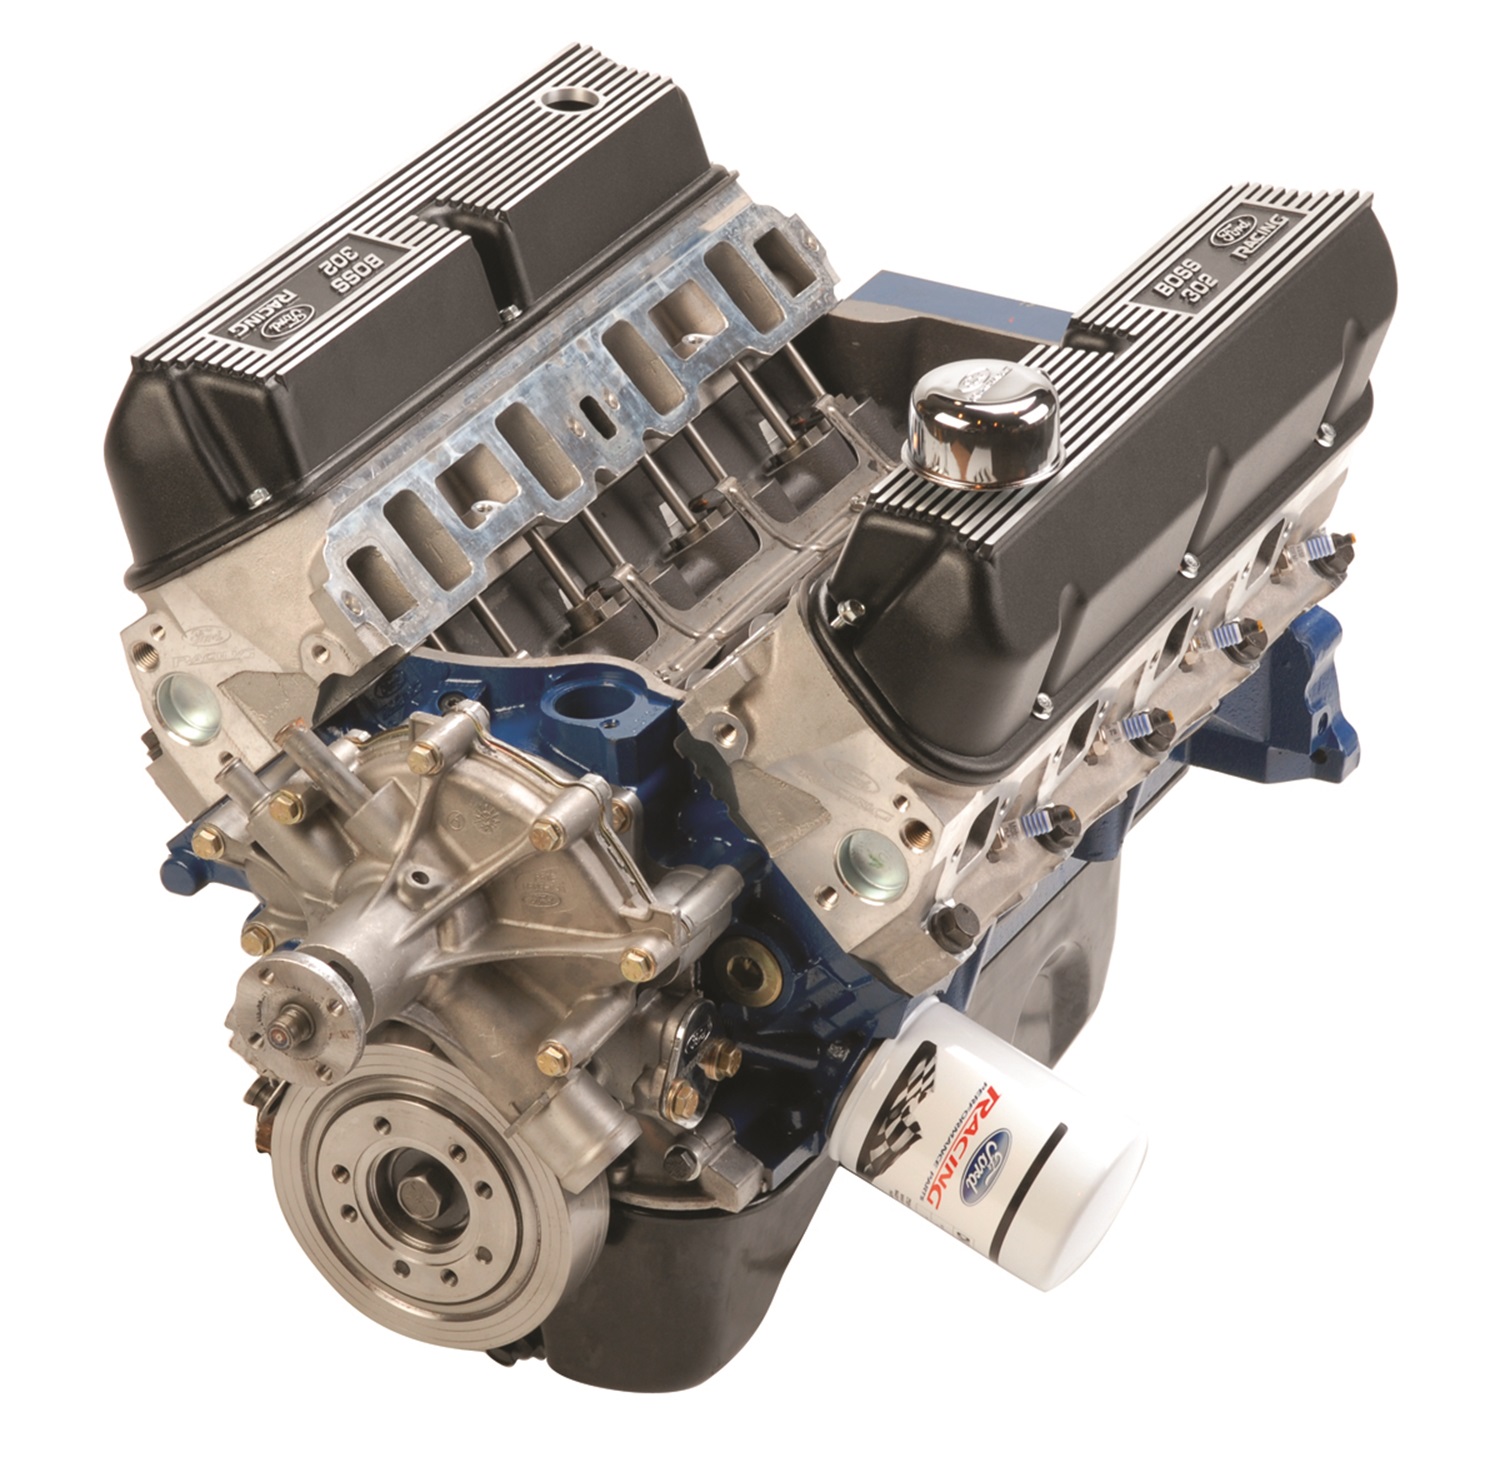 Ford racing crate engines australia #2